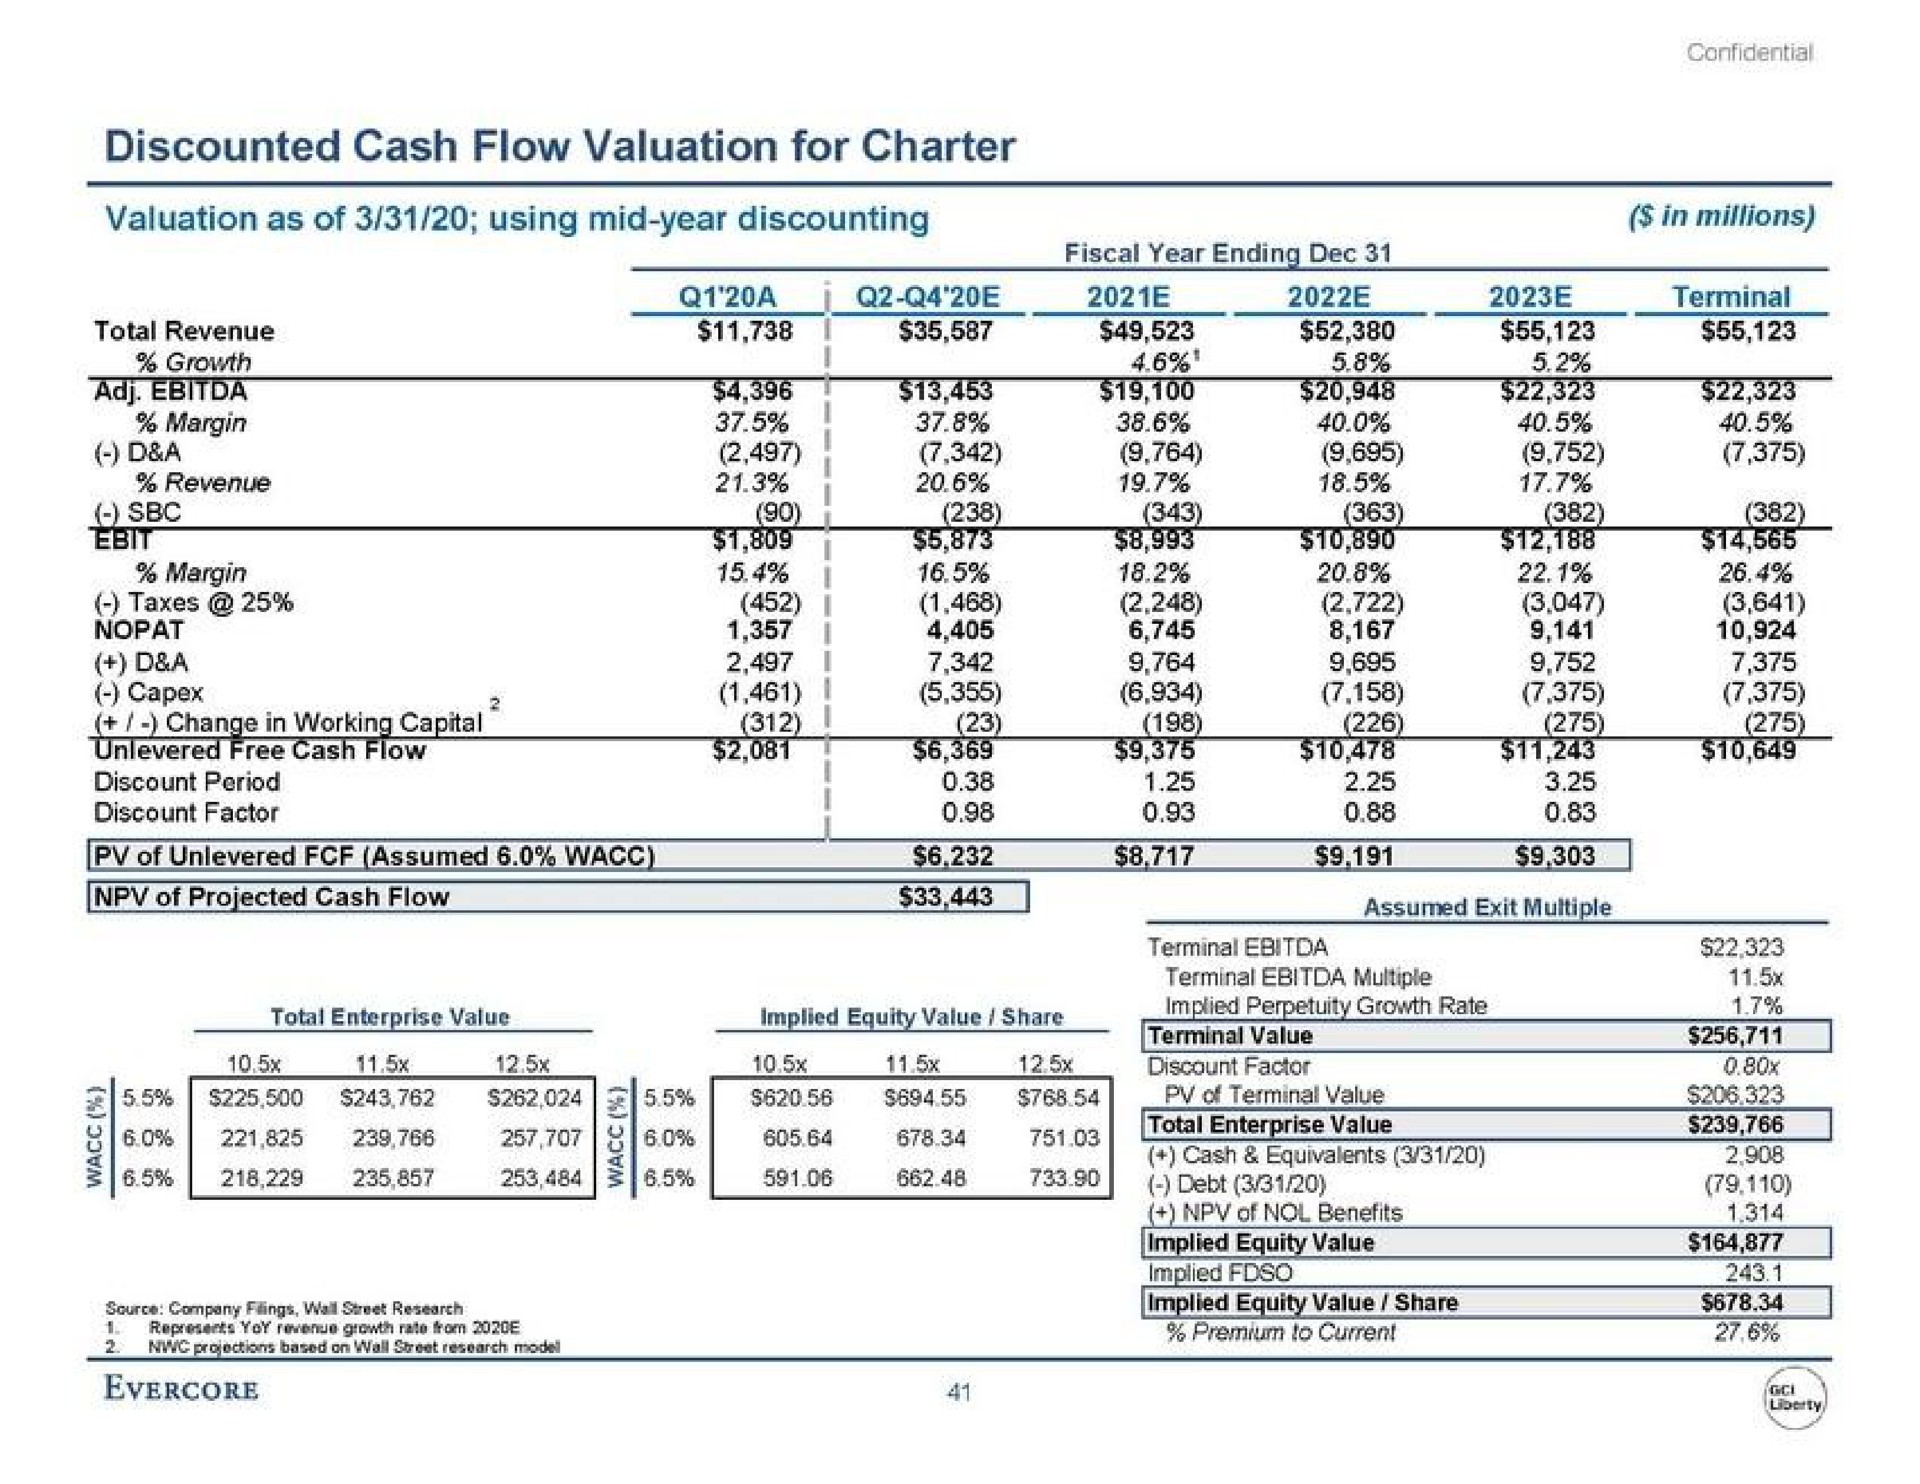 discounted cash flow valuation for charter a terminal | Evercore